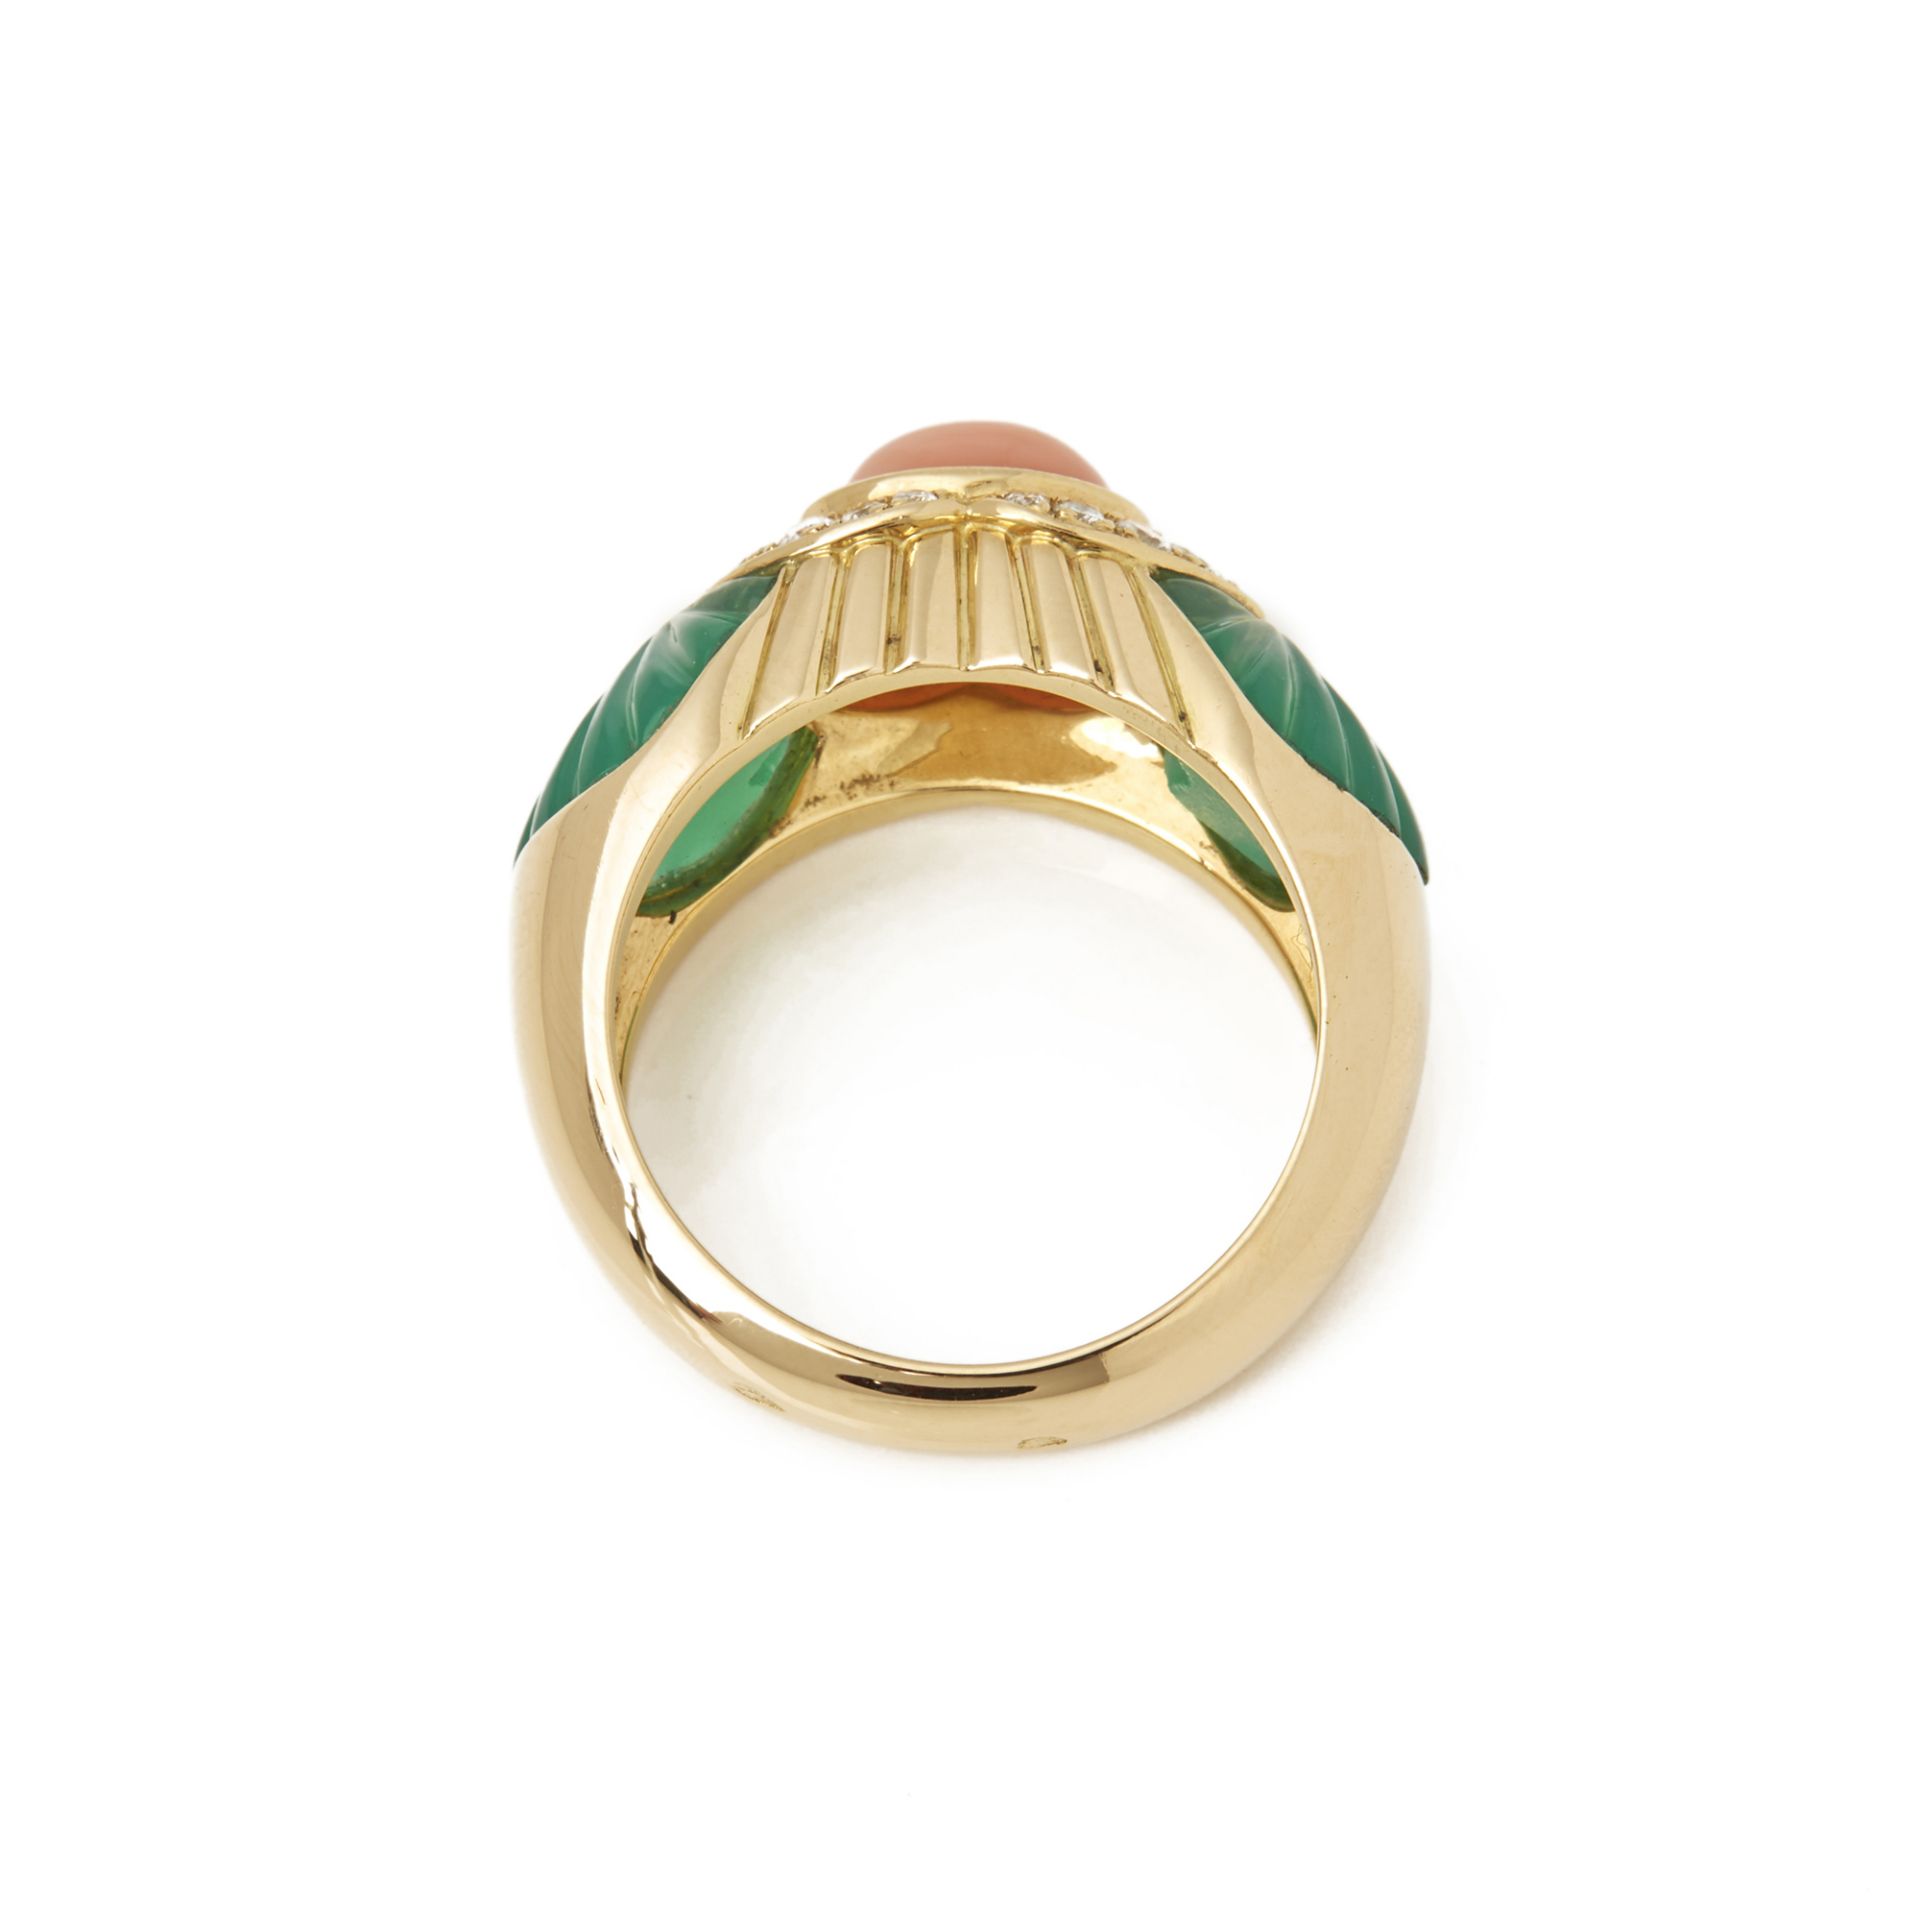 Cartier 18k Yellow Gold Chrysoprase, Coral & Diamond Ring - Image 4 of 7